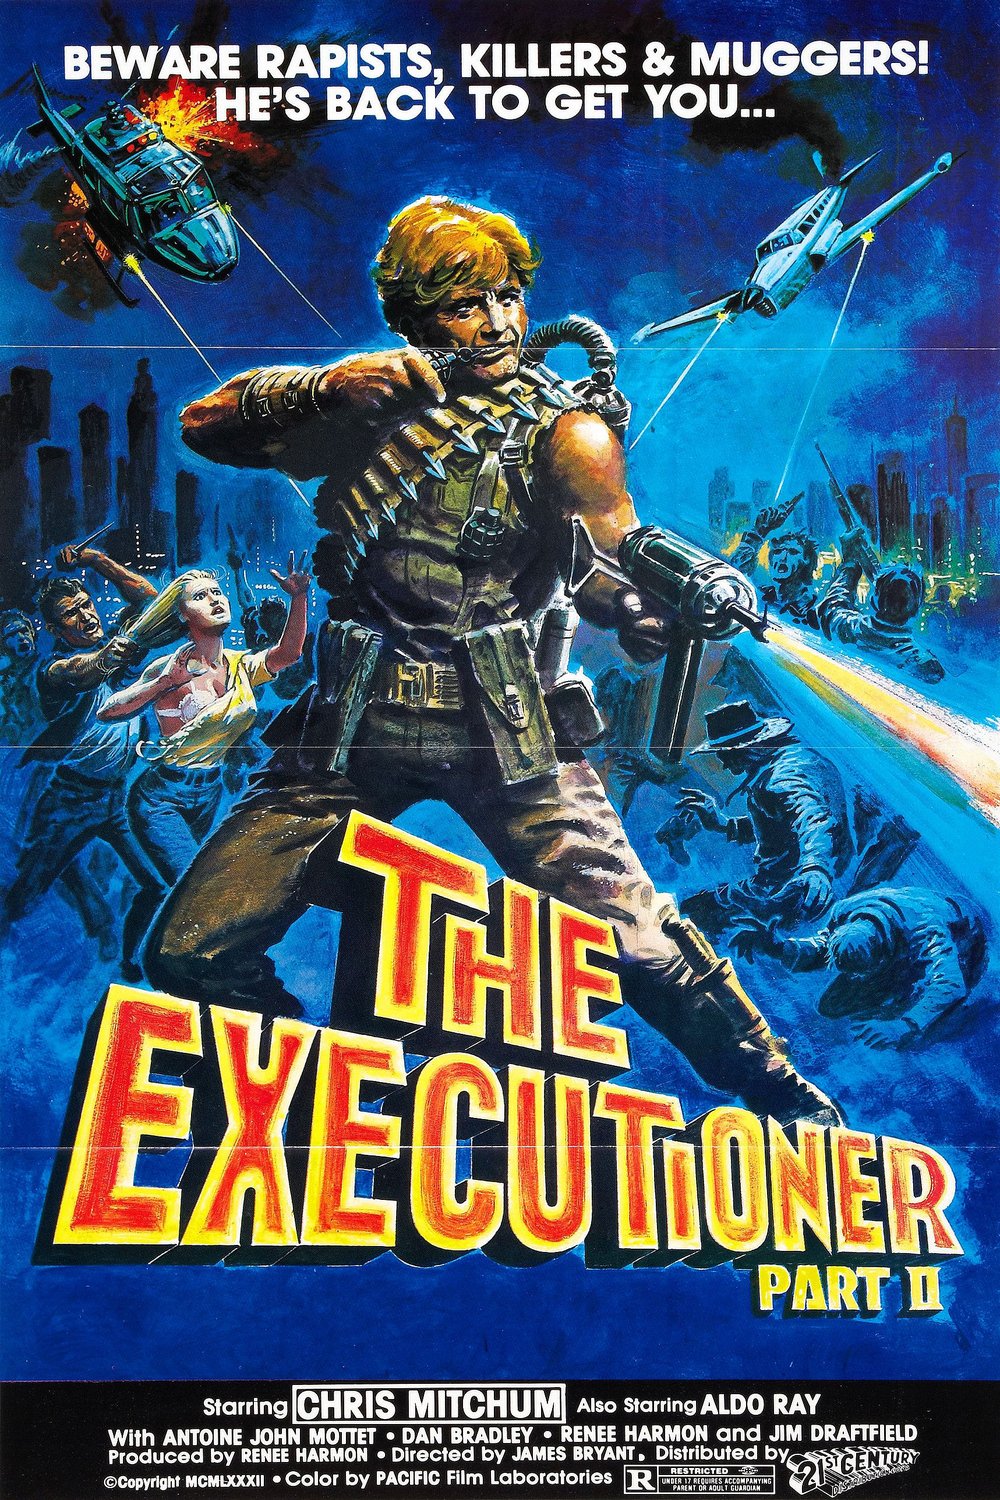 Poster of the movie The Executioner, Part II